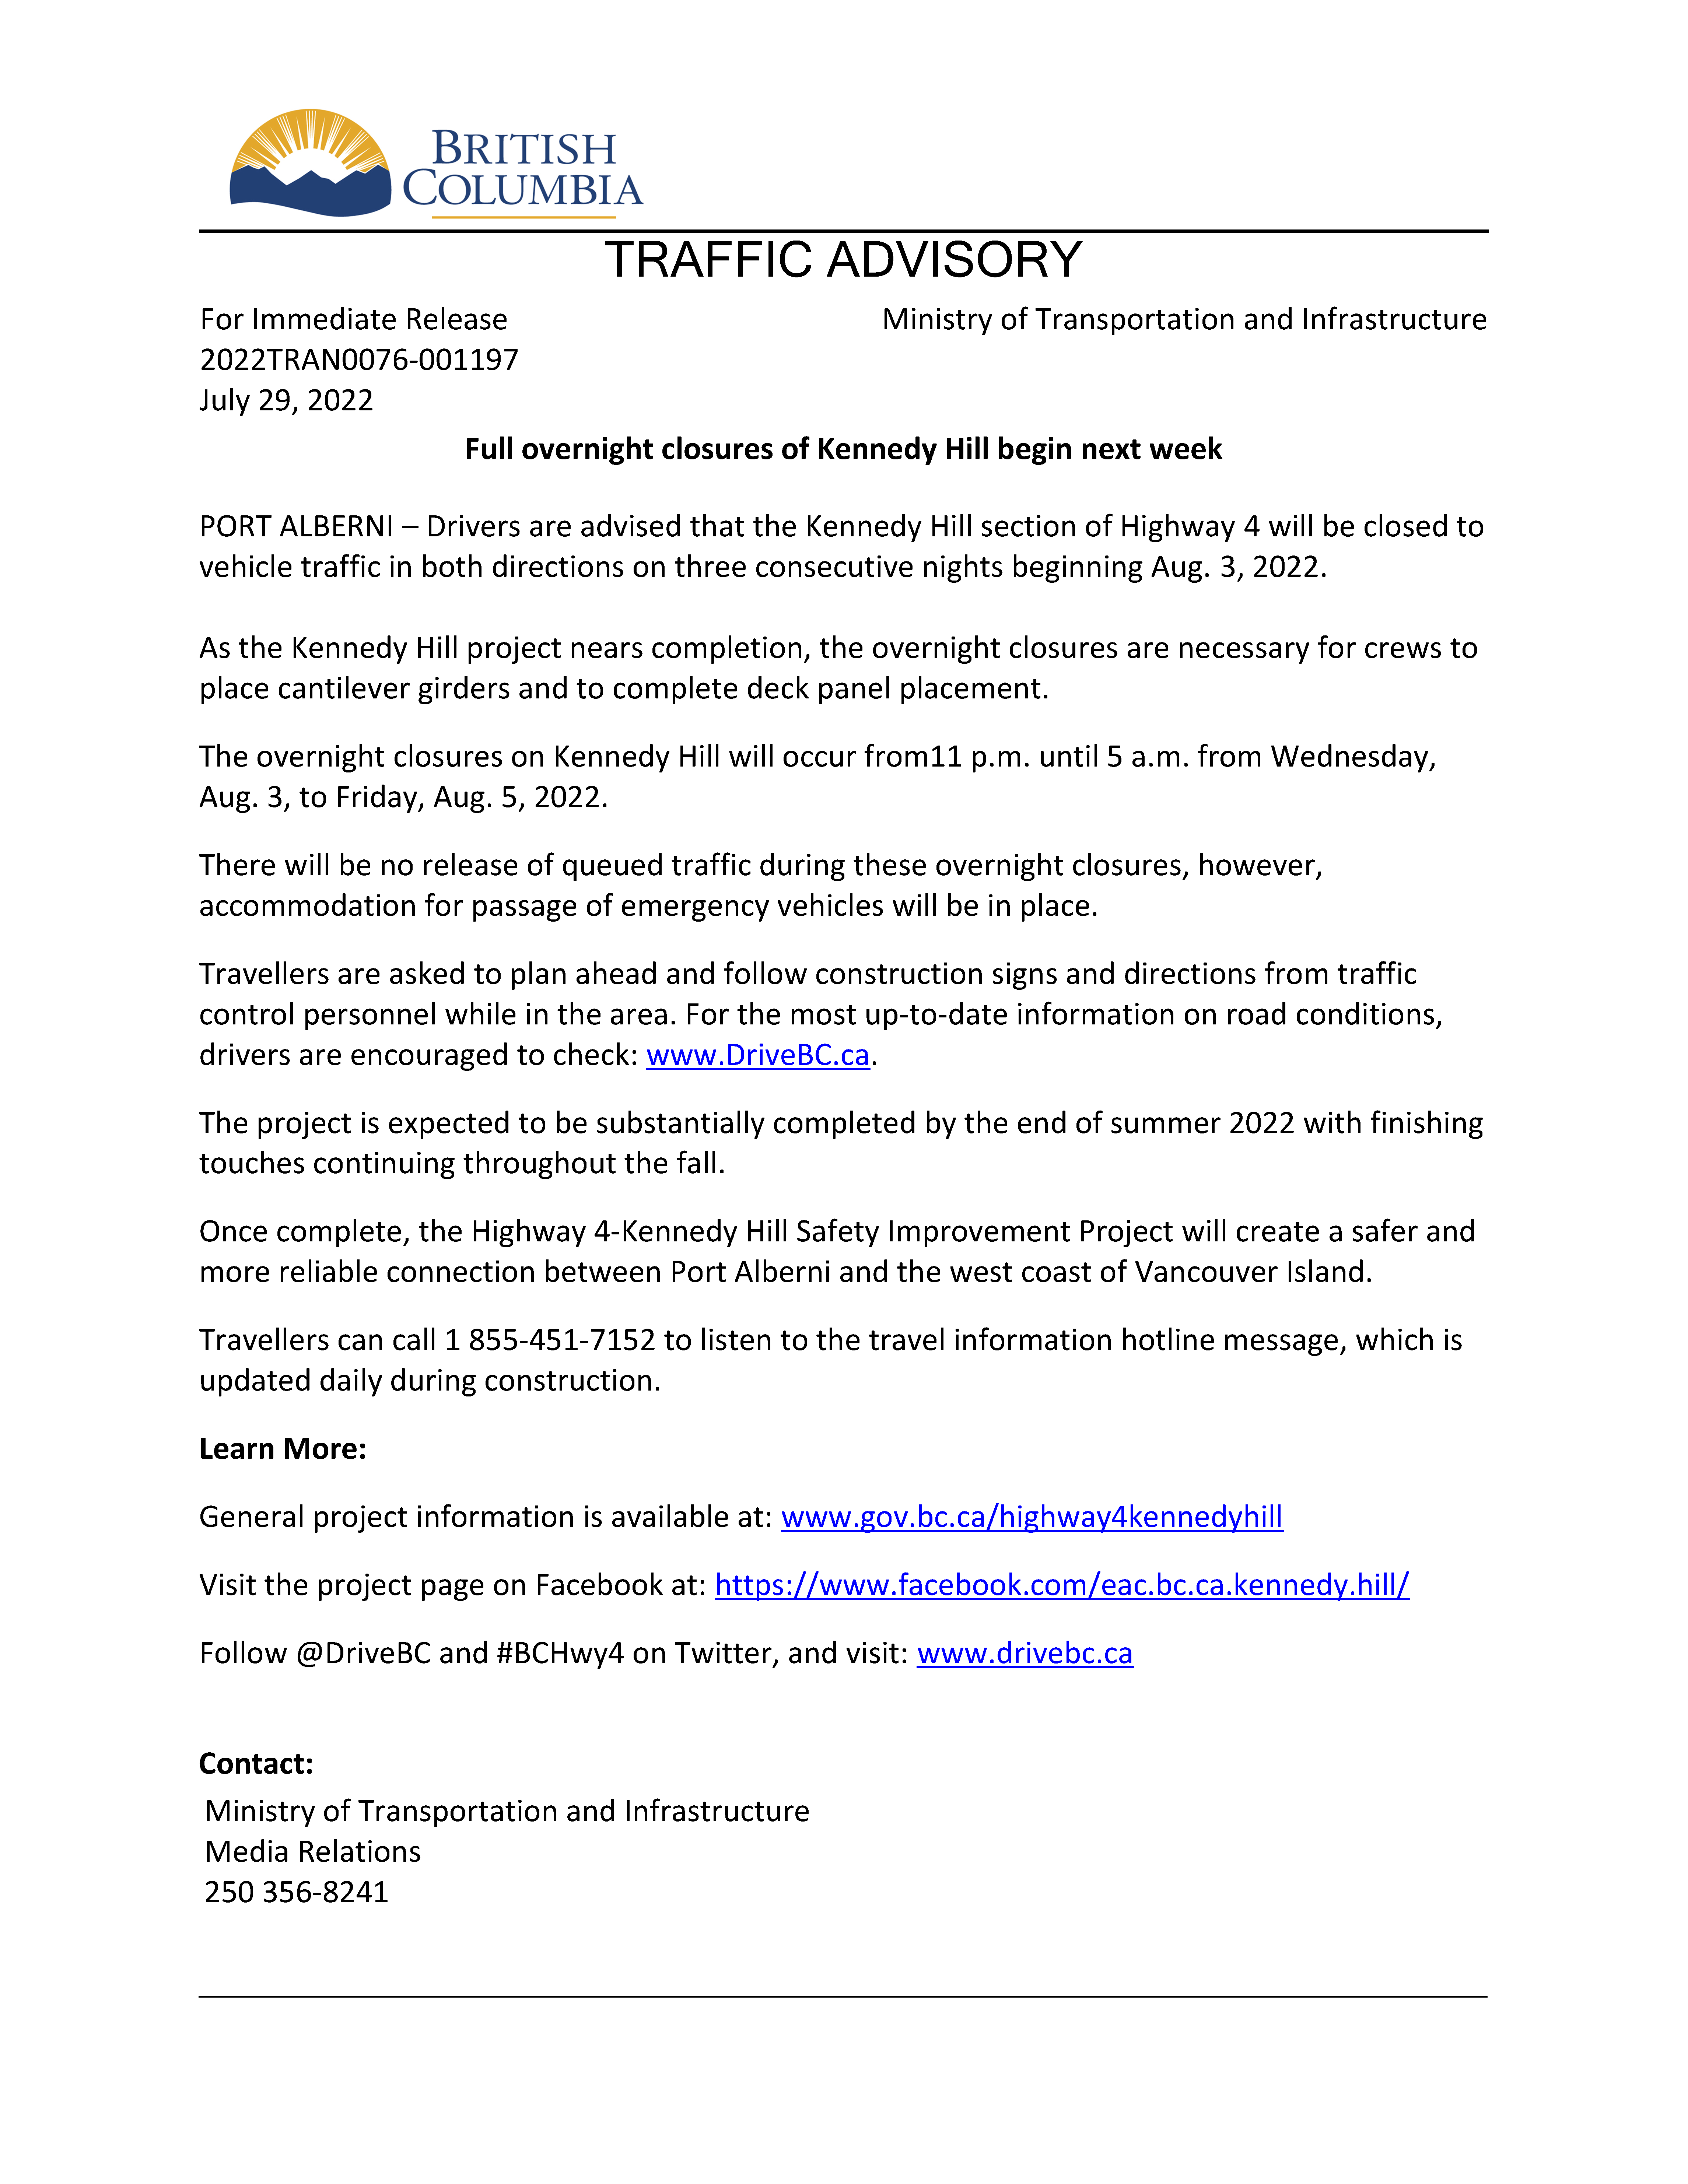 FINAL TA Full overnight closures of Kennedy Hill begin next week Page 1